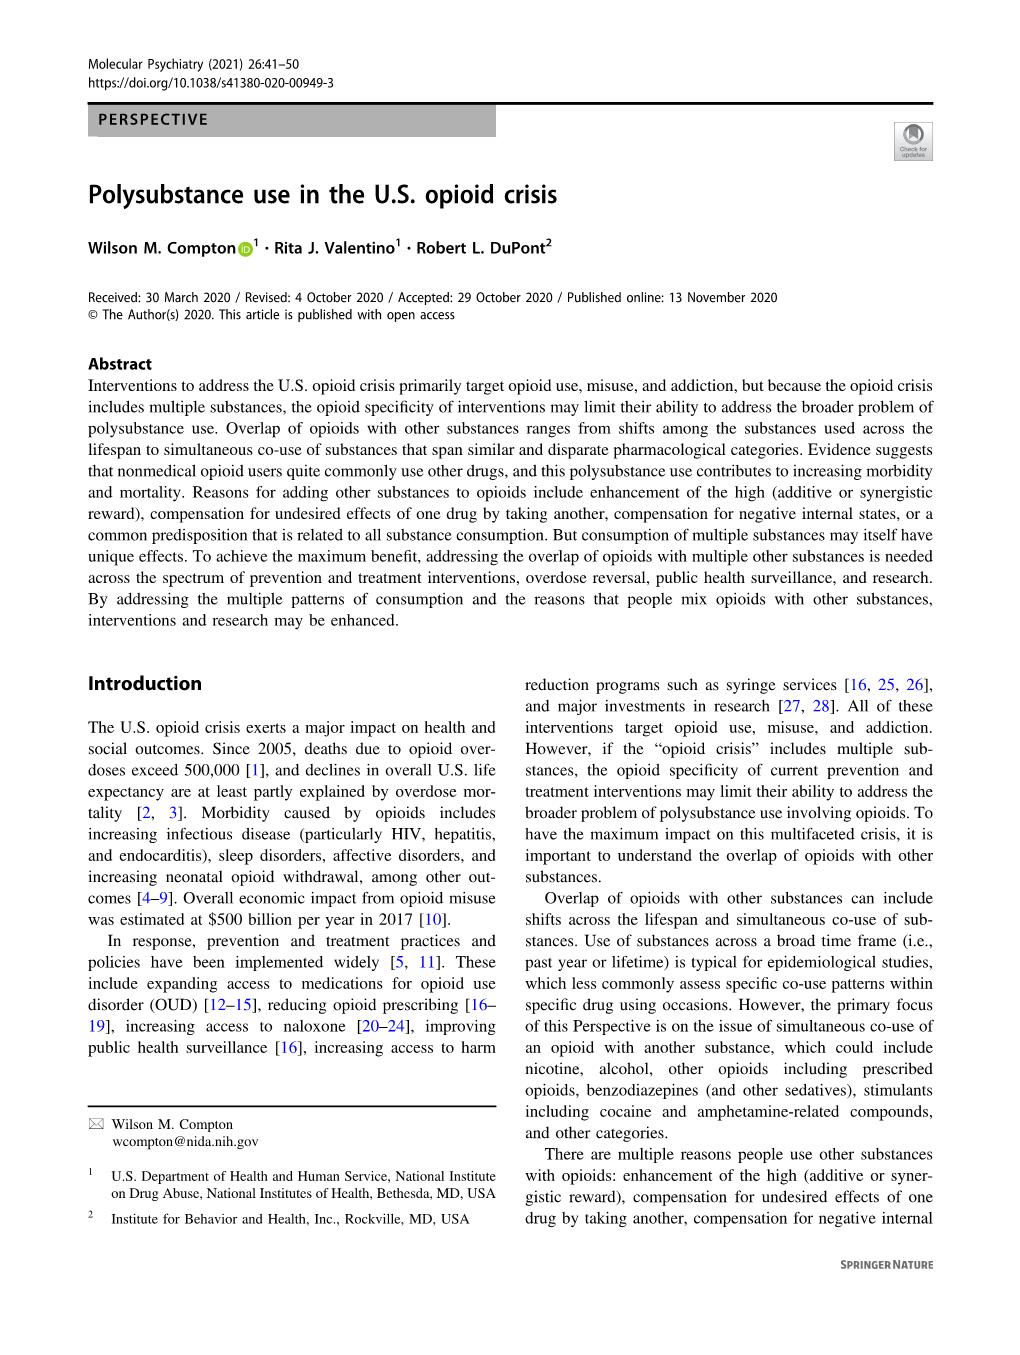 Polysubstance Use in the U.S. Opioid Crisis